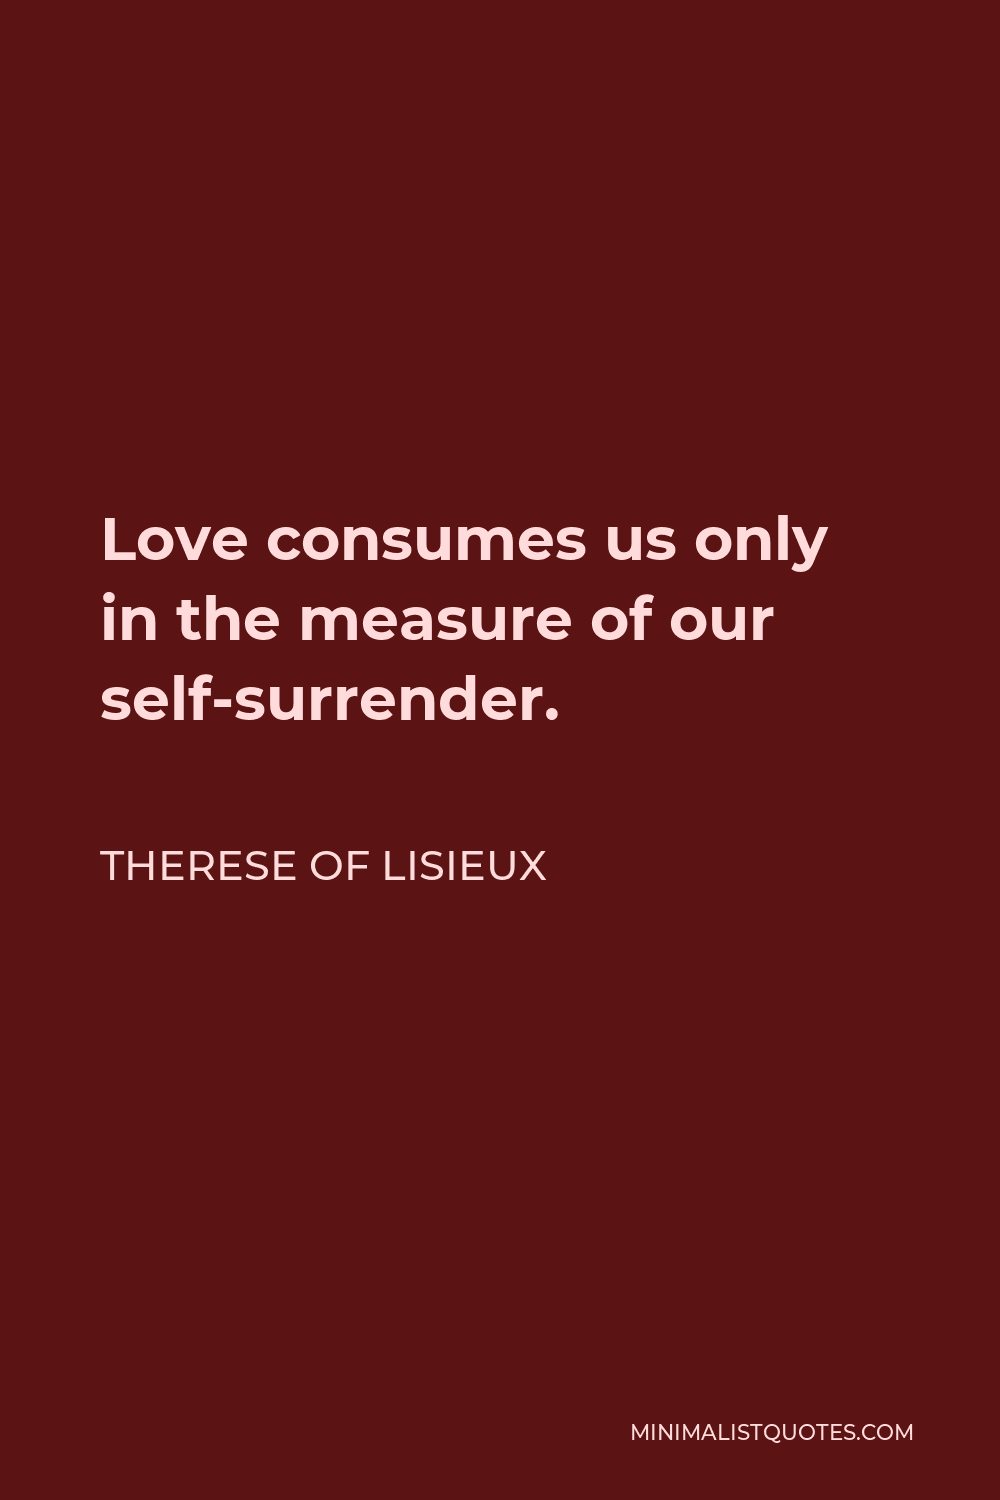 Therese of Lisieux Quote - Love consumes us only in the measure of our self-surrender.